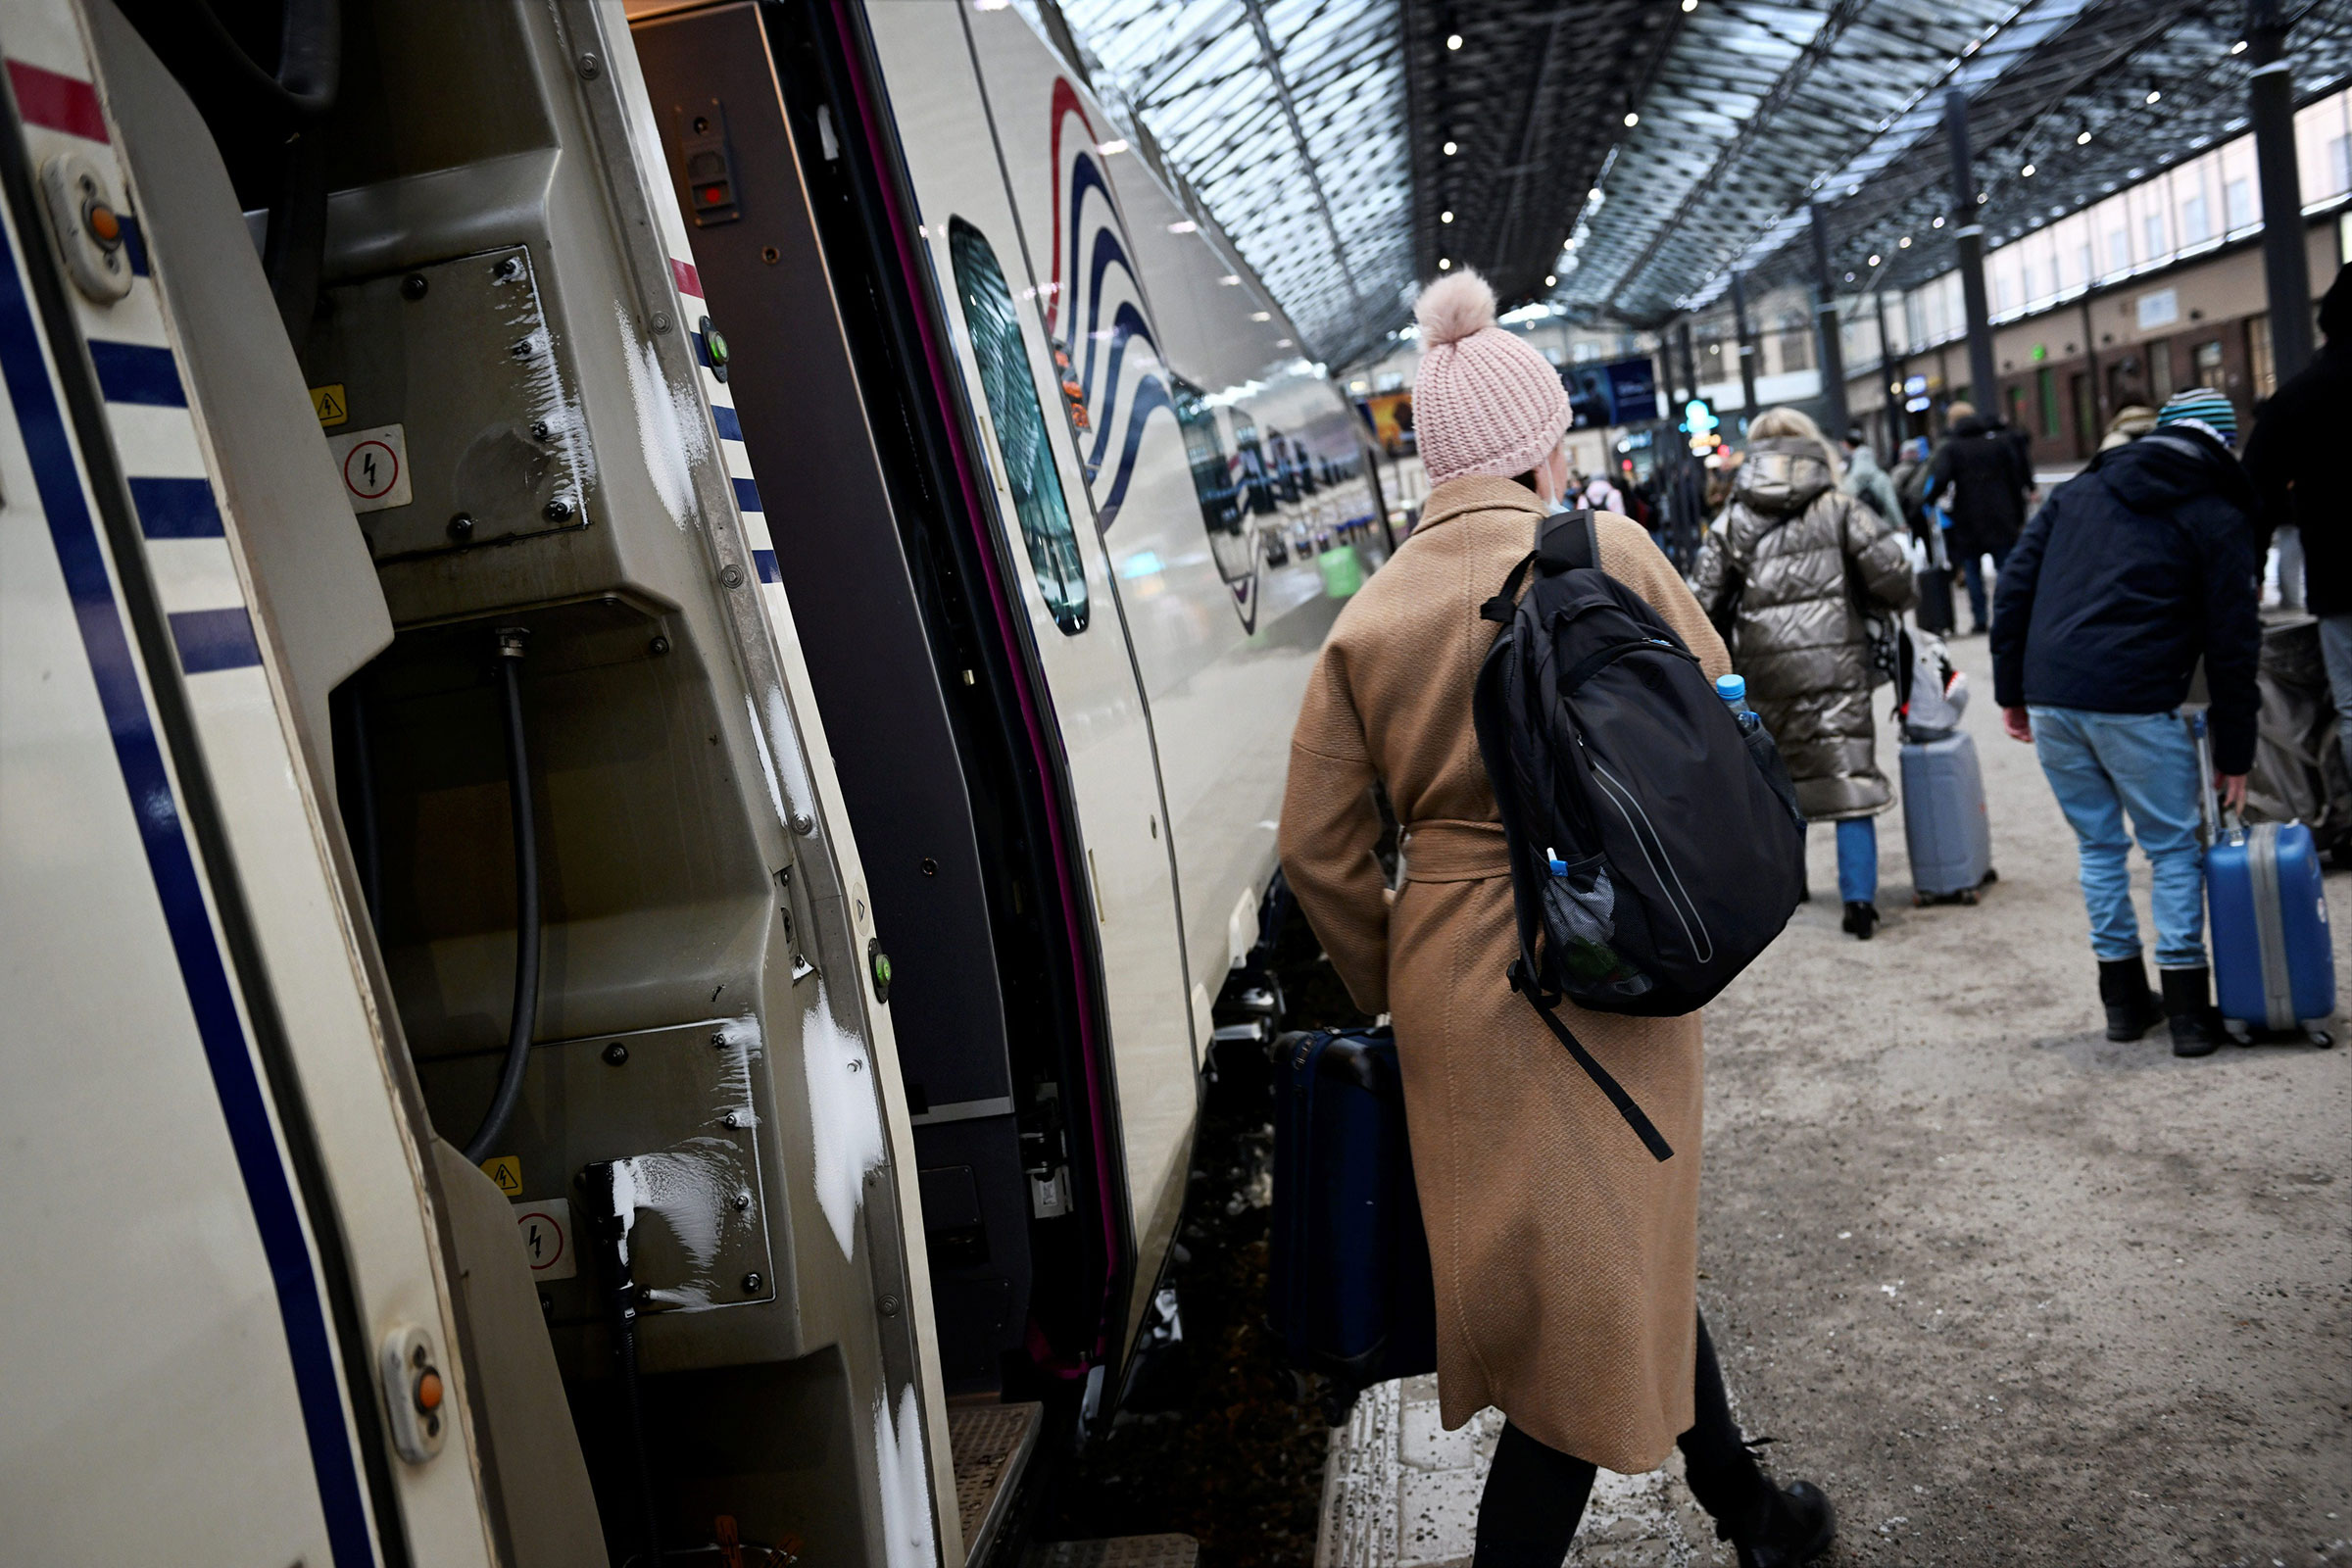 People get off the Allegro train from from St. Petersburg at the central railway station in Helsinki on March 9. (Antti Aimo-Koivisto—Shutterstock)